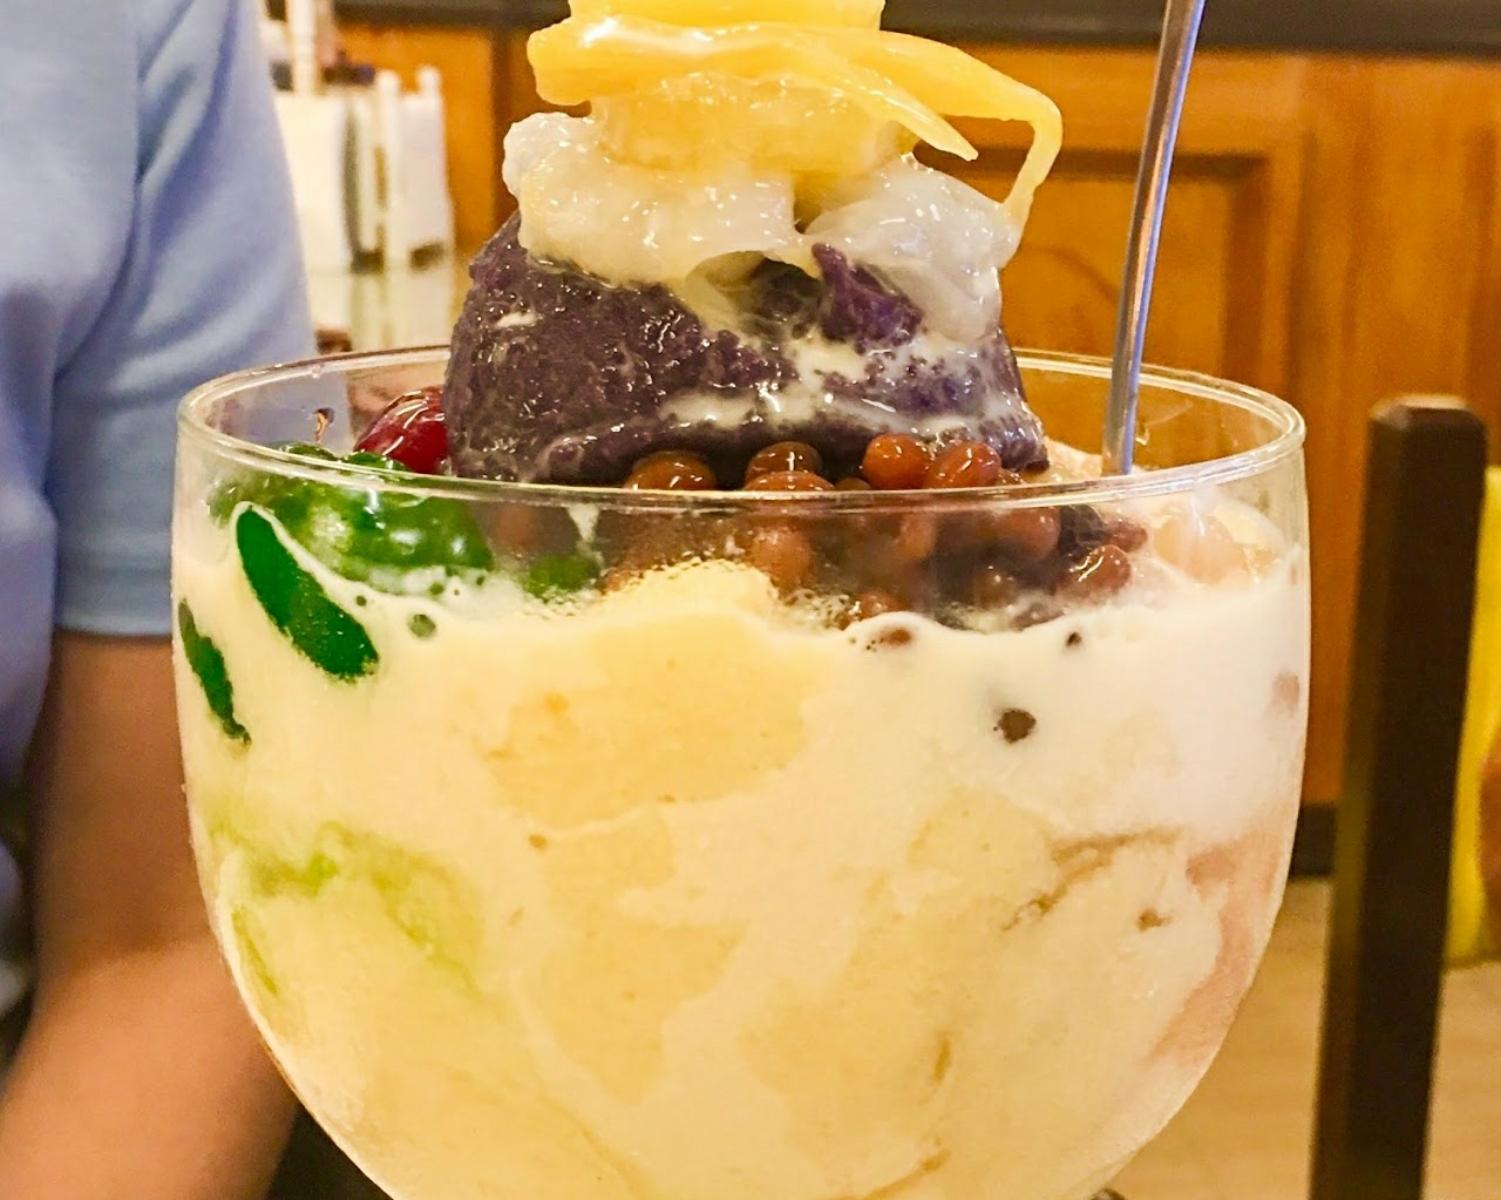 SOME VARIETIES OF HALO-HALO IN THE PHILIPPINES